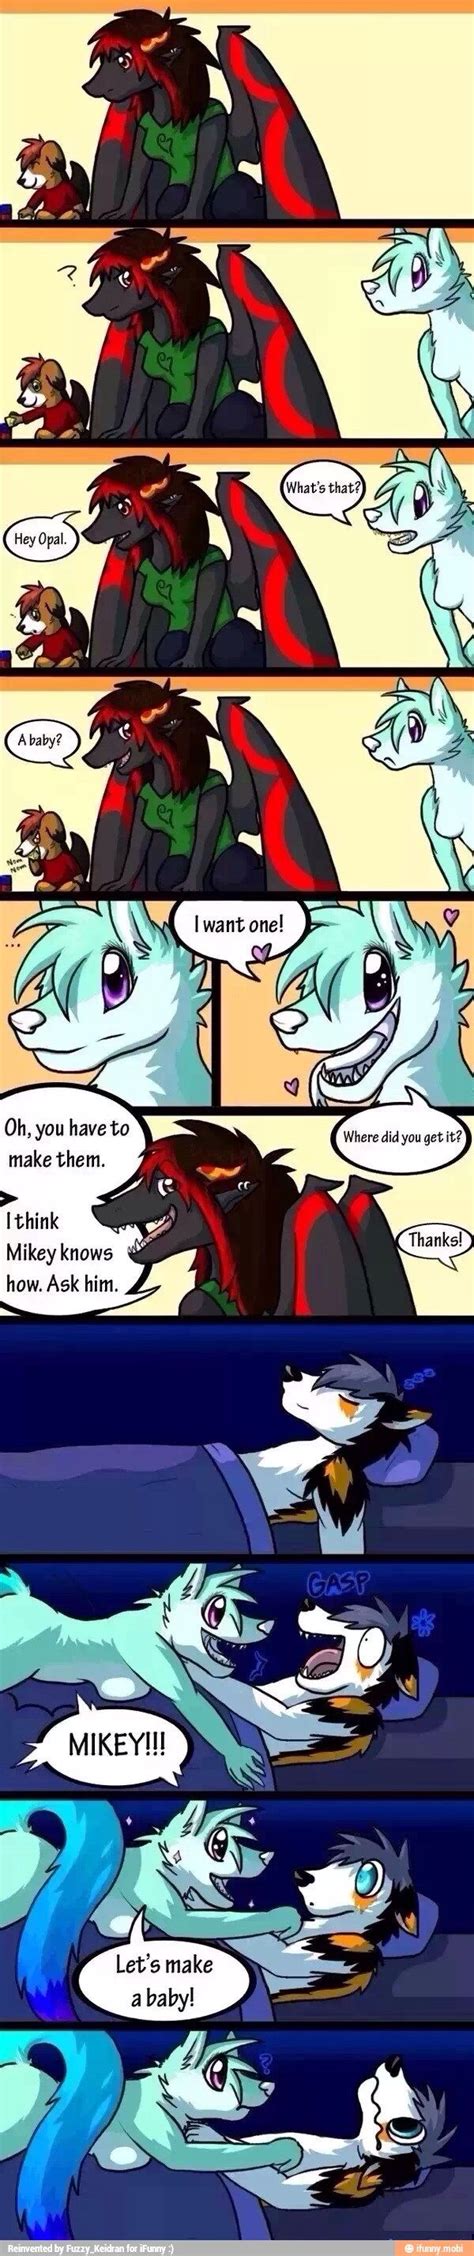 17 best images about furry on pinterest wolves my name is and art